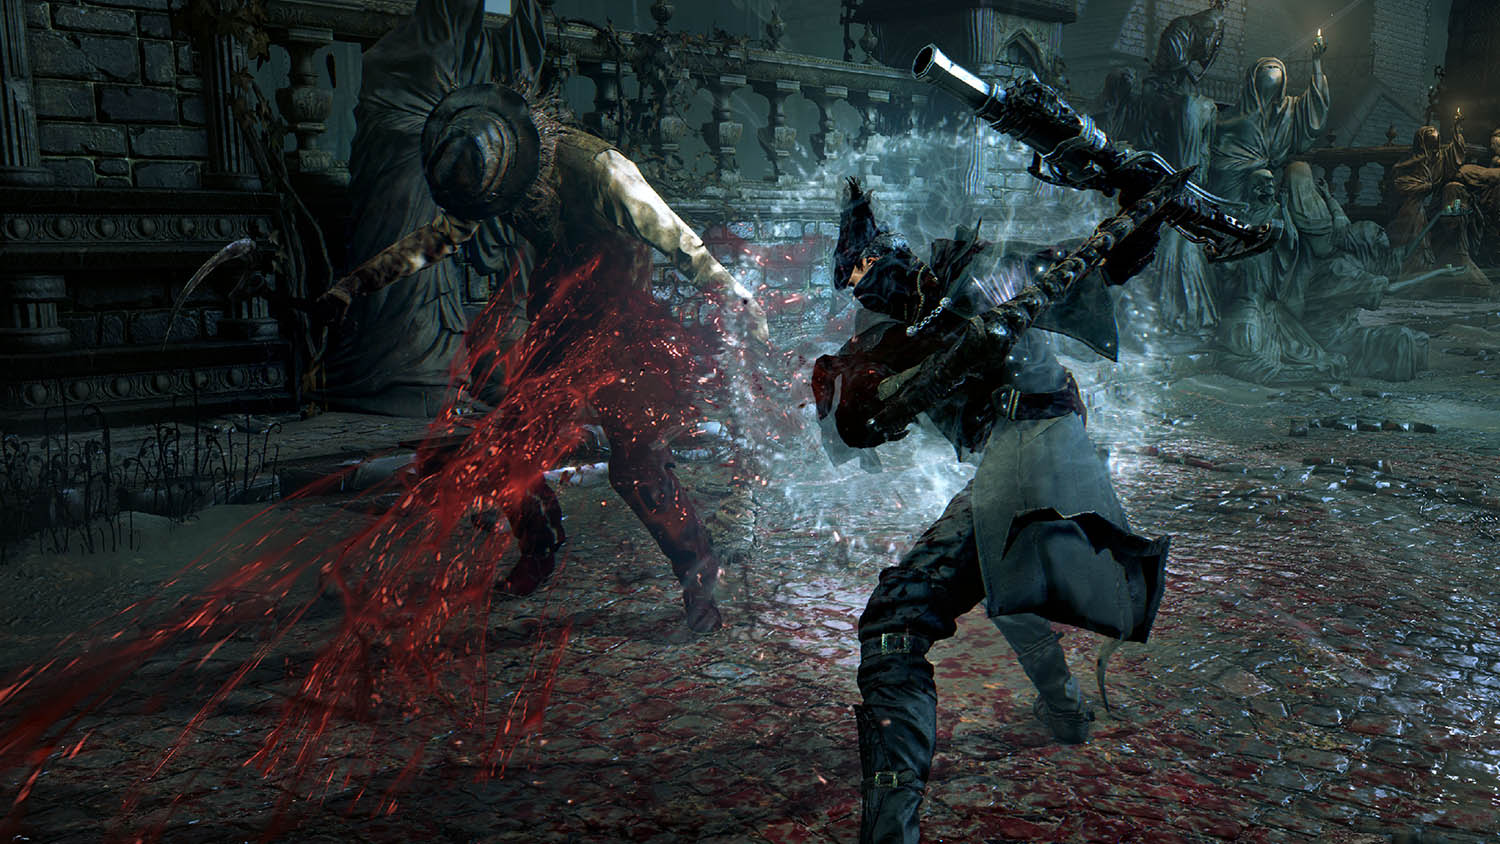 bloodborne-ps4-screens-3-bloodborne-5-reasons-why-this-could-be-game-of-the-year copy